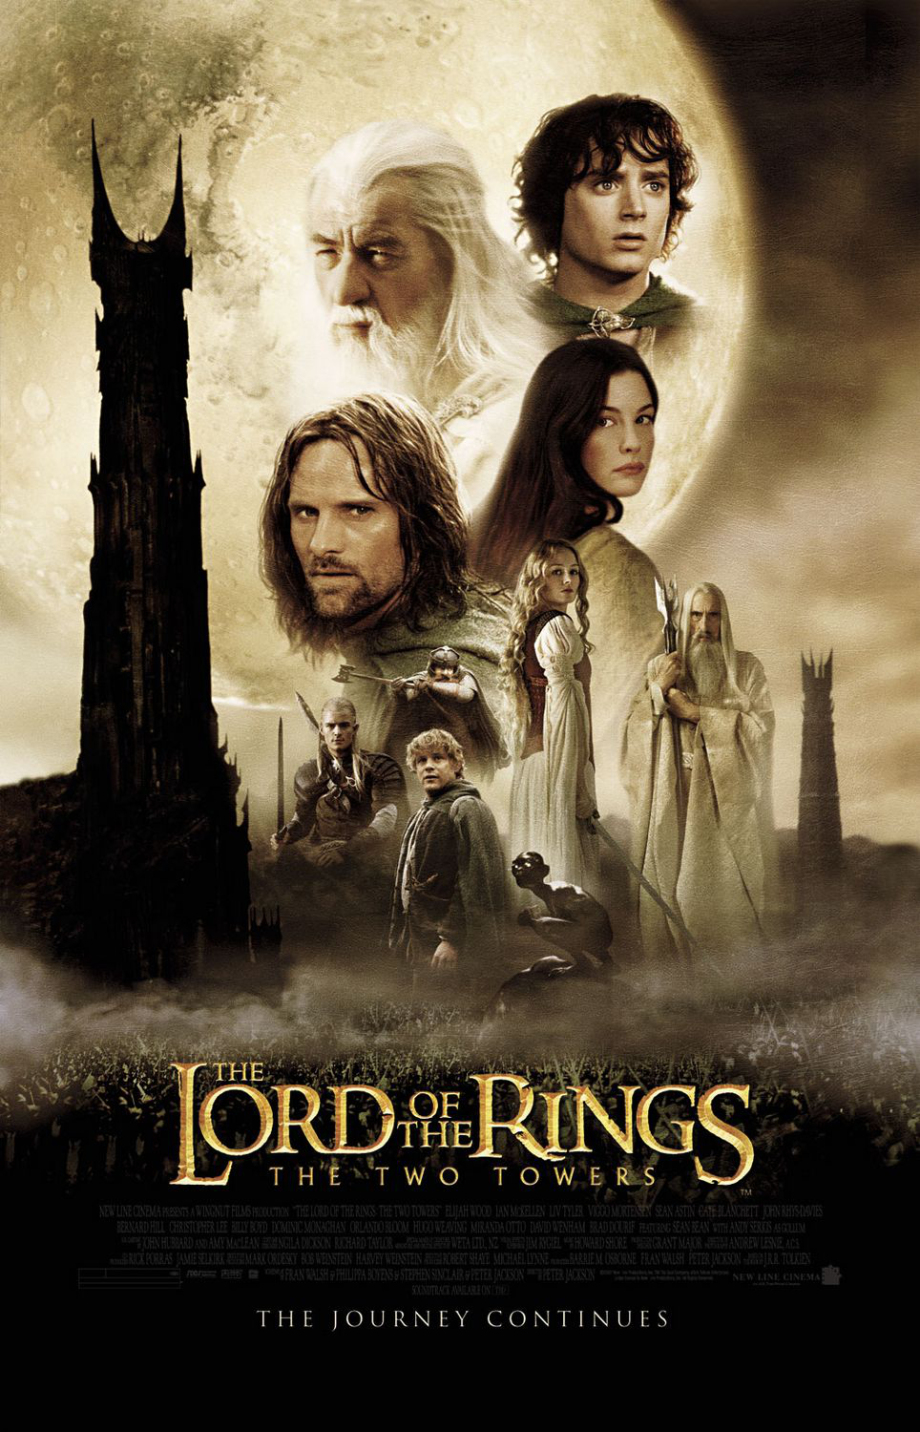 2003: The Lord of the Rings: The Return of the King — 8.9